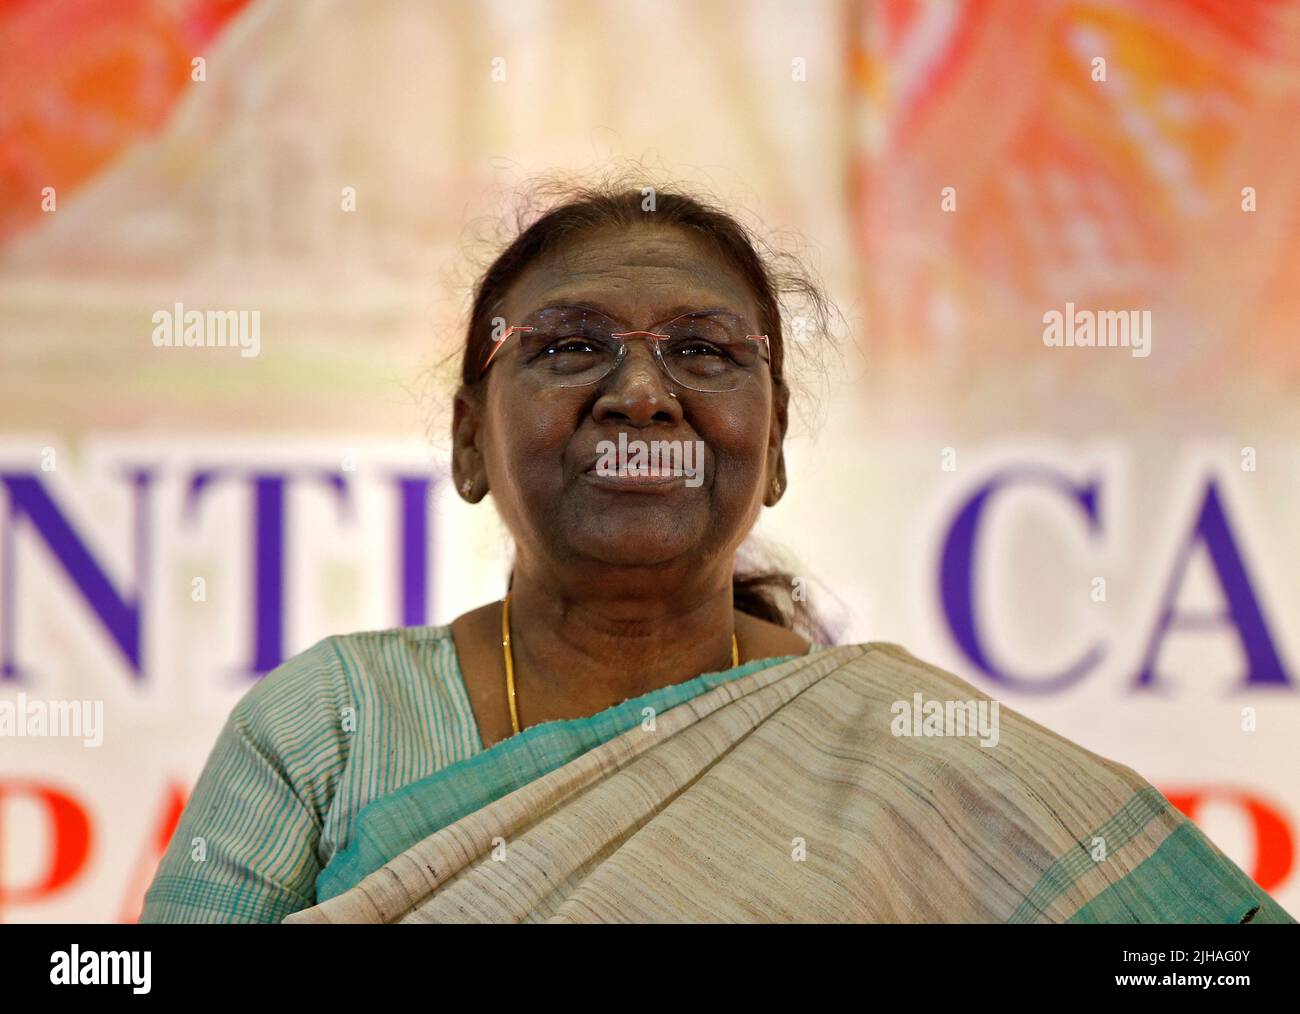 Droupadi Murmu, 64, a female politician who was nominated as presidential candidate by Prime Minister Narendra Modi's ruling Bharatiya Janata Party (BJP), attends a meeting ahead of India's presidential elections, in Ahmedabad, India, July 17, 2022. REUTERS/Amit Dave Stock Photo